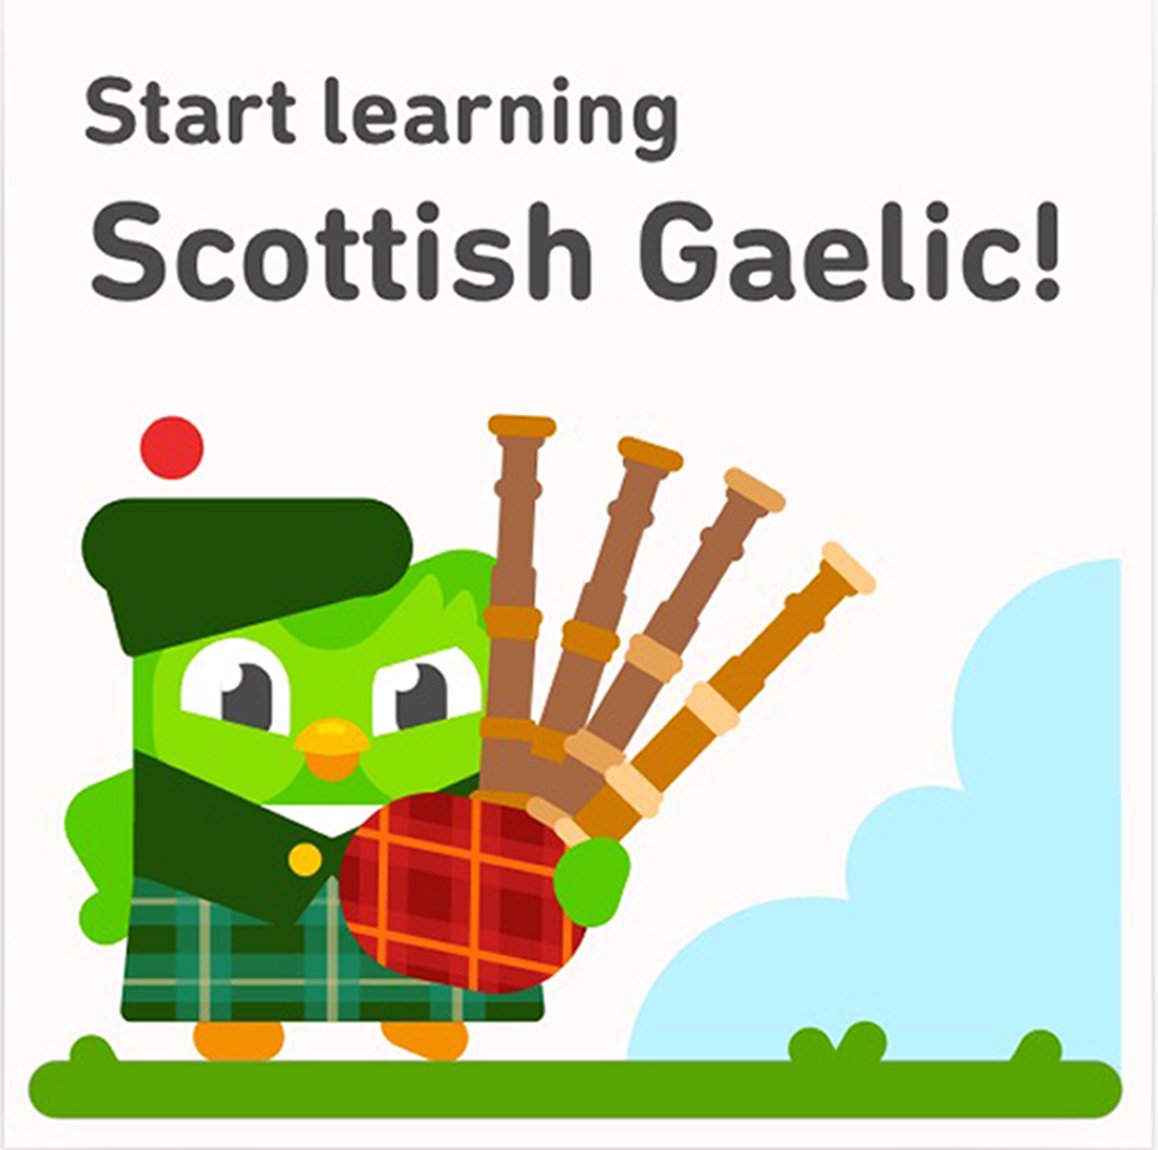 Duolingo phone app with the new Scottish Gaelic course which will be released on on St Andrew's Day.